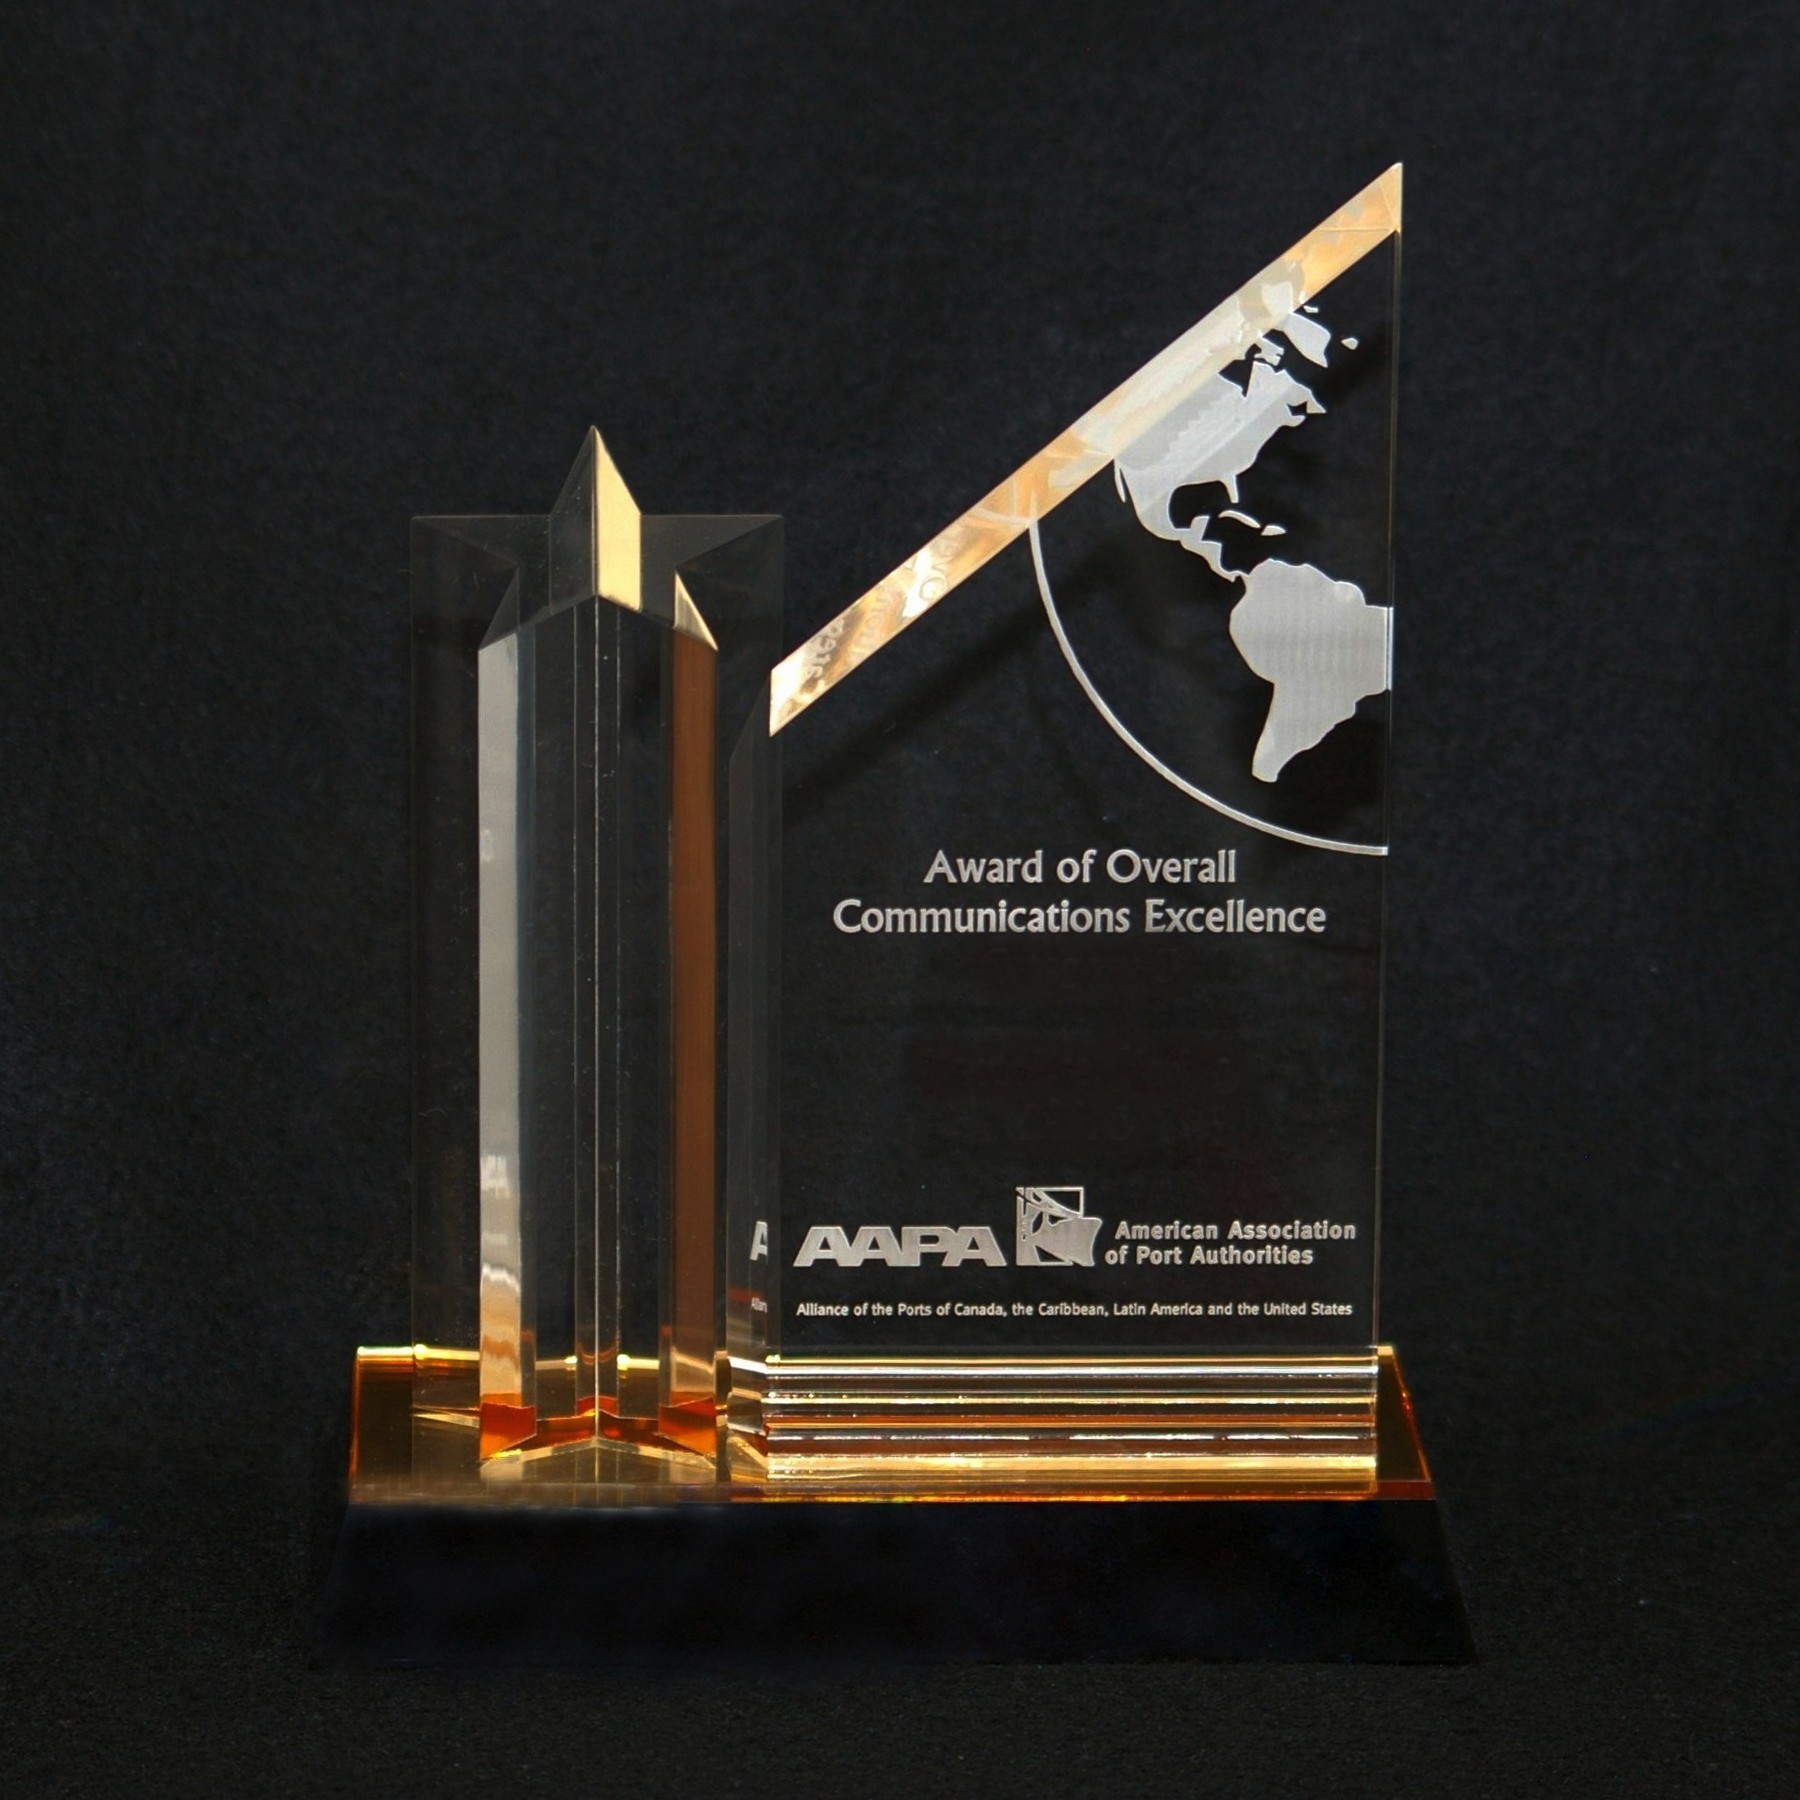 Overall Award Of Communications Excellence Trophy